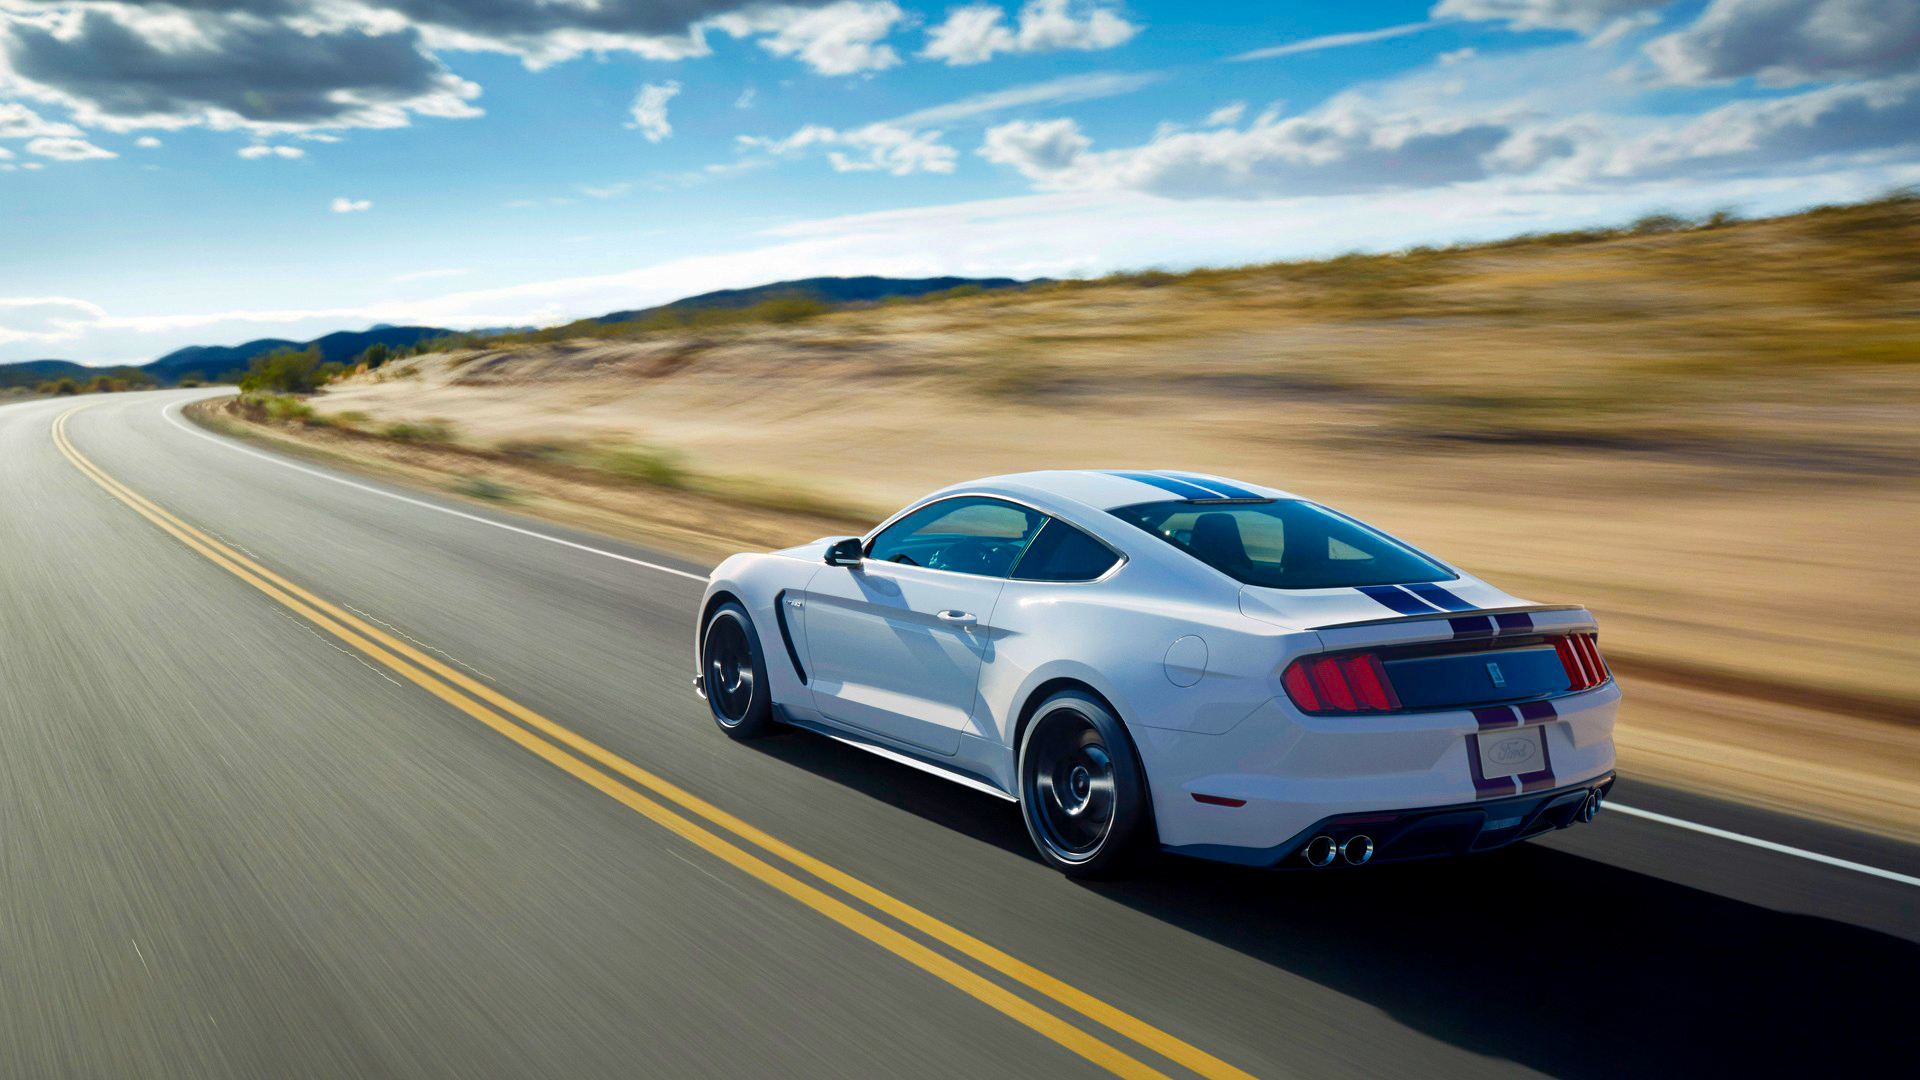 Ford Mustang Shelby GT350 HD Wallpapers and Backgrounds. 